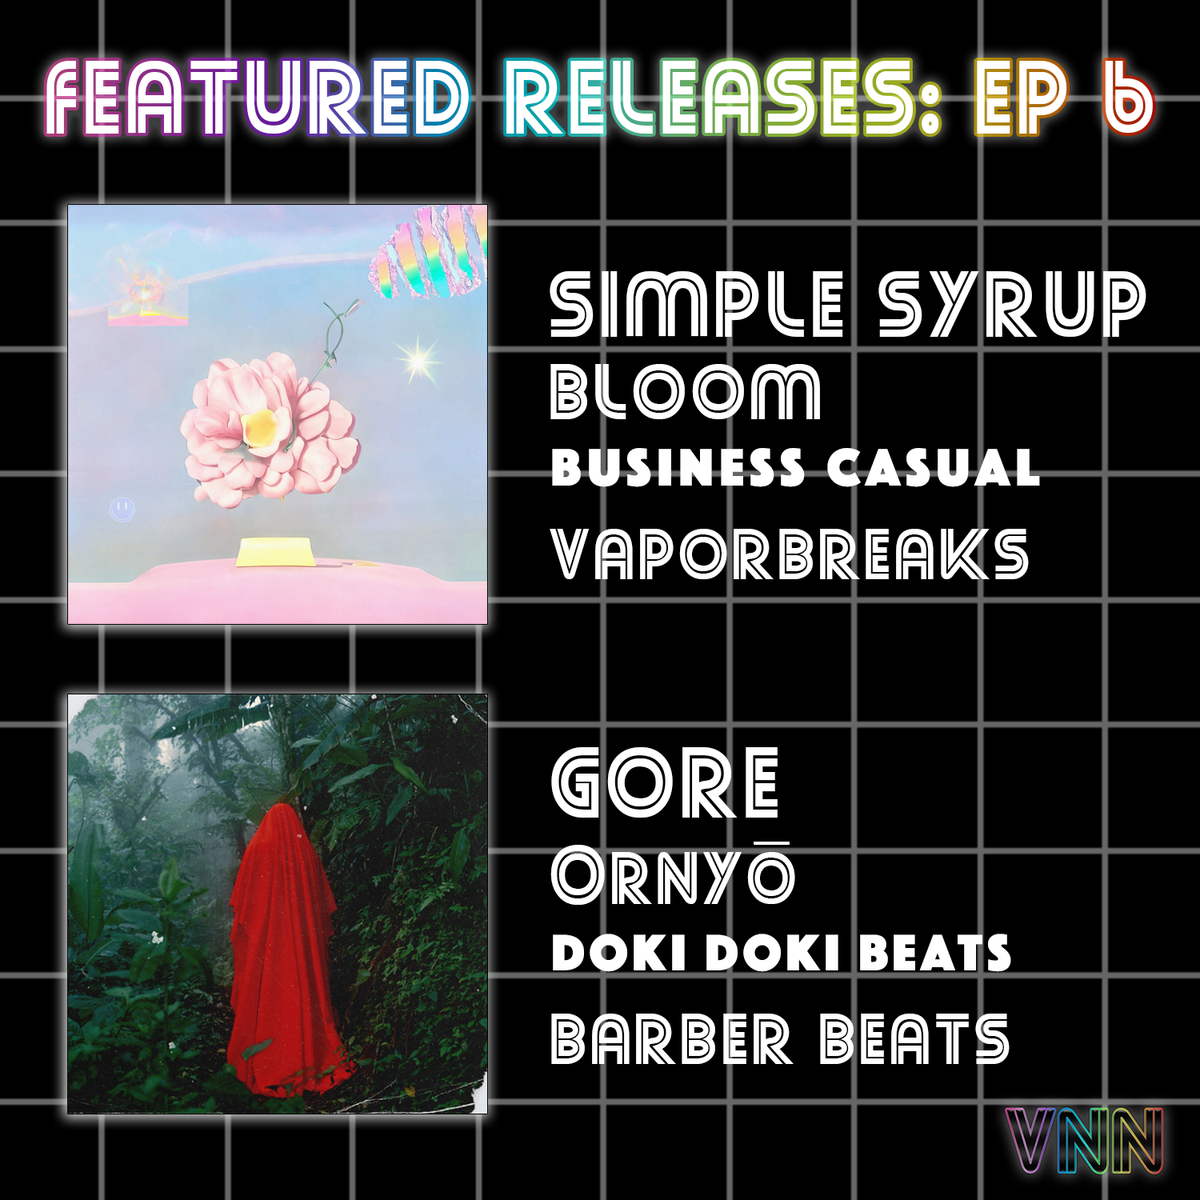 Featured Releases: Simple Syrup - Bloom & GORE - Onryō (Ep. 6)